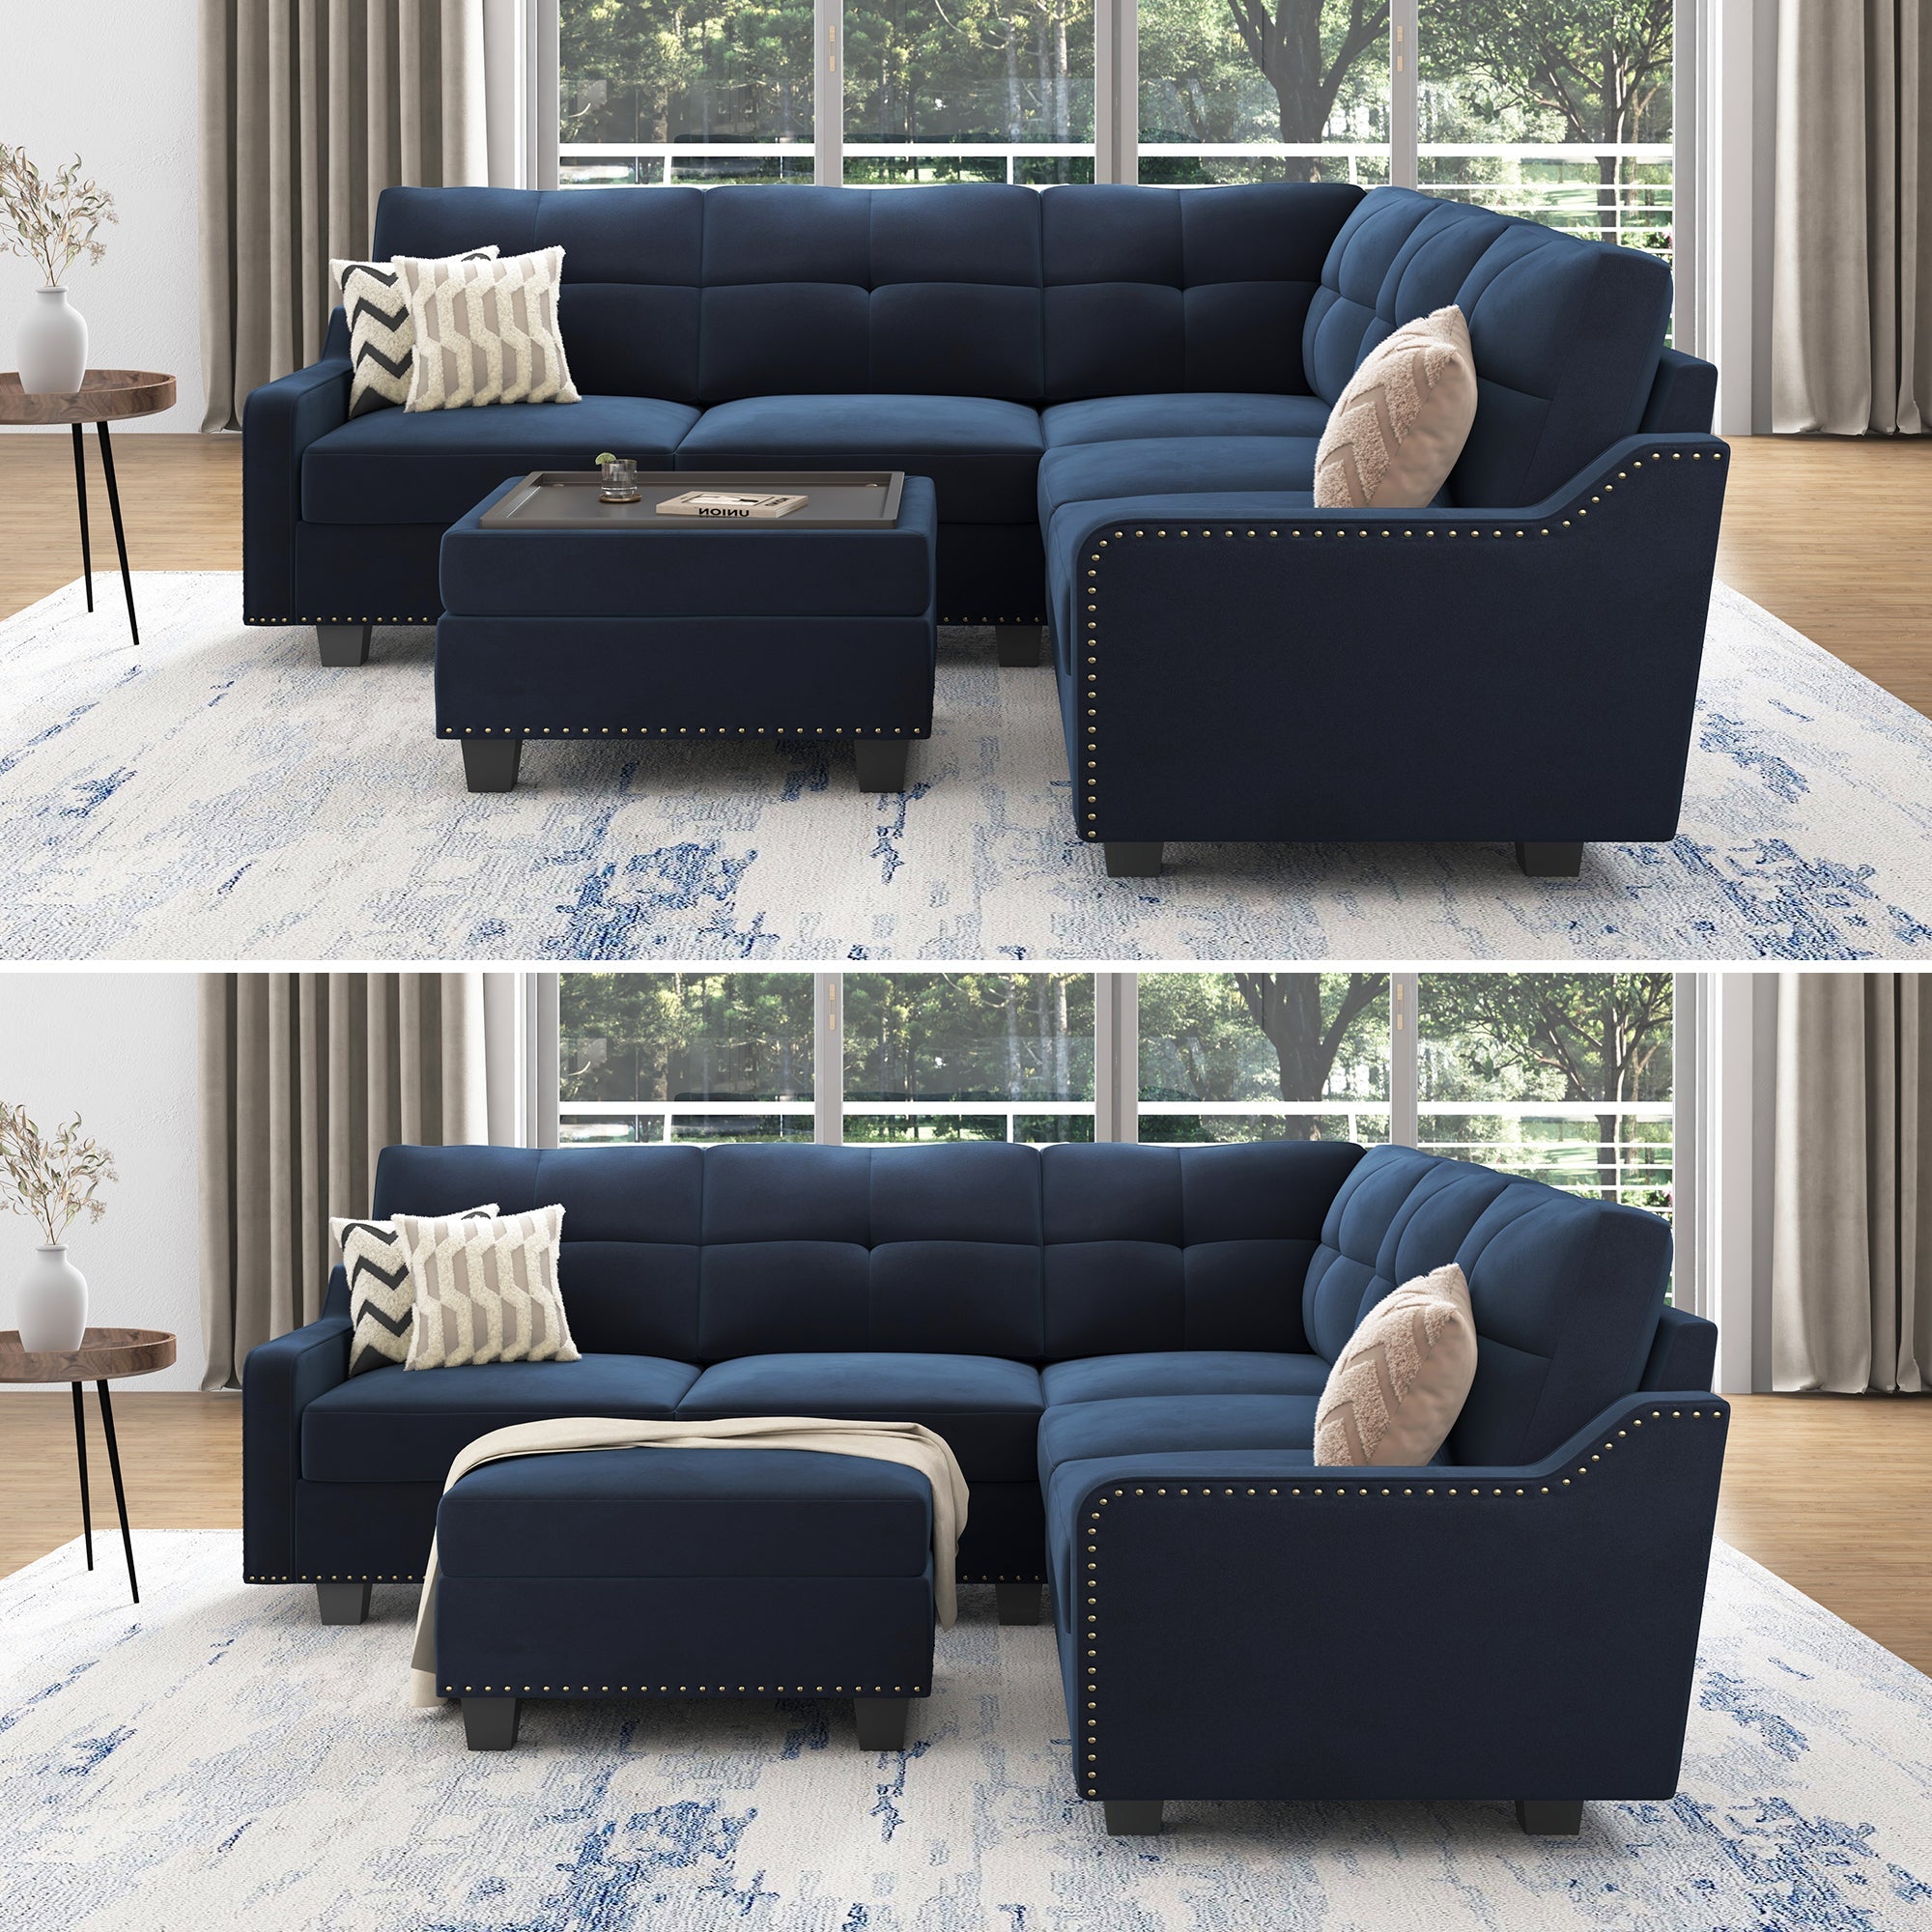 HONBAY 6-Piece Velvet Convertible Sectional With Tray Ottoman